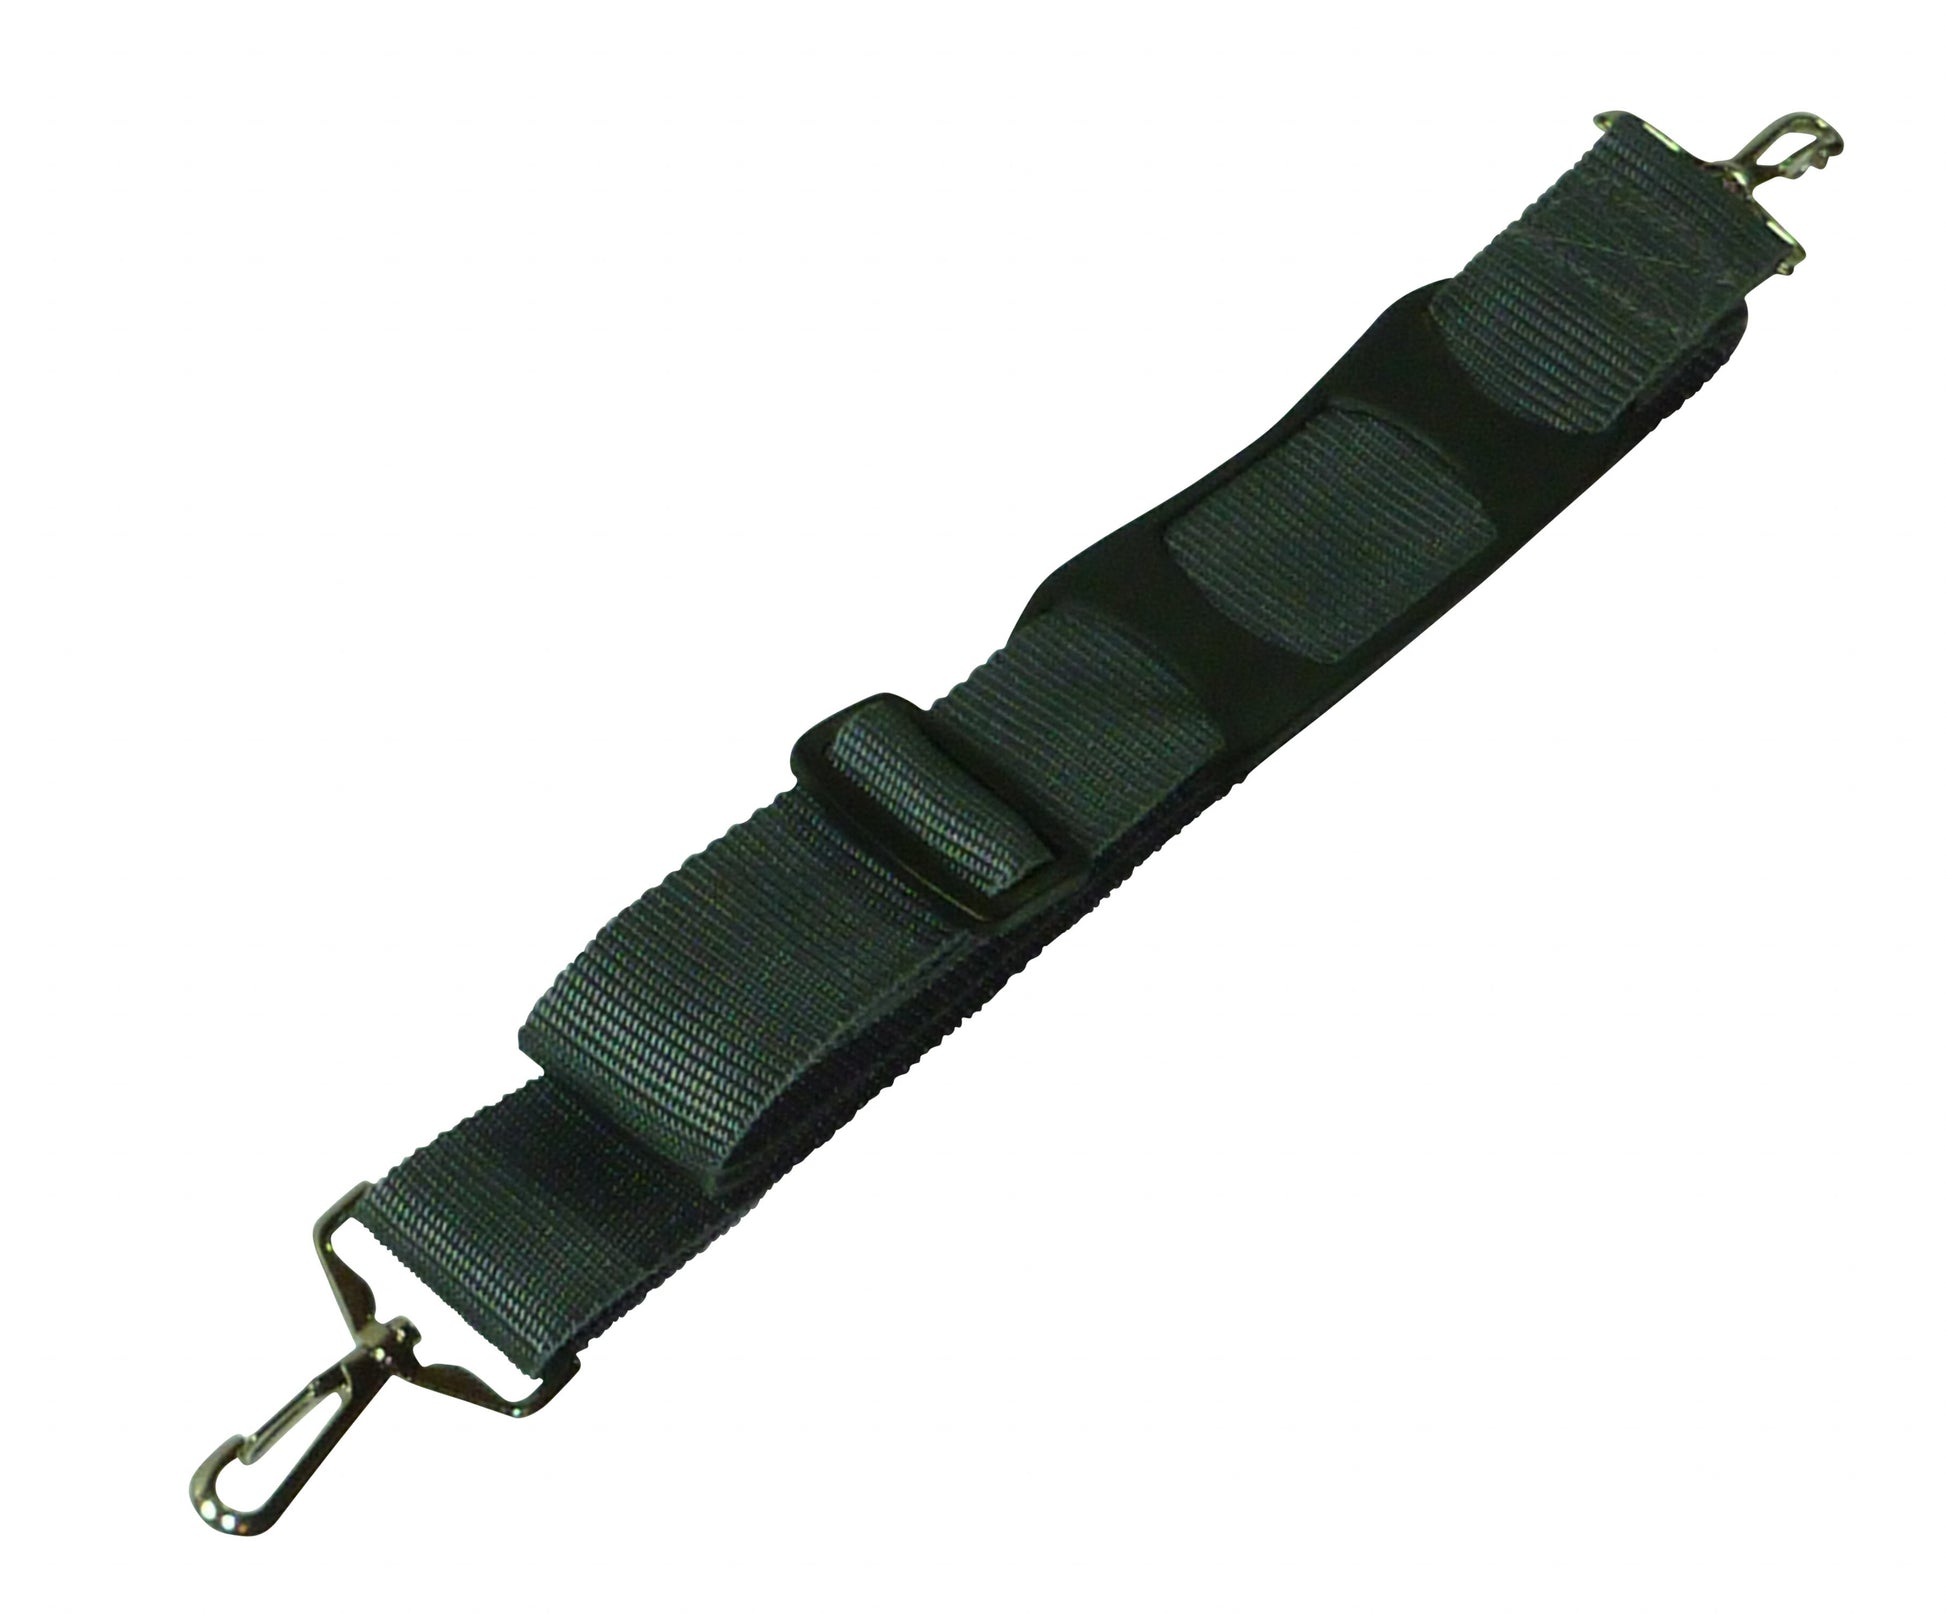 38mm Bag Strap with Metal Buckles and Shoulder Pad, 150cm in forest green